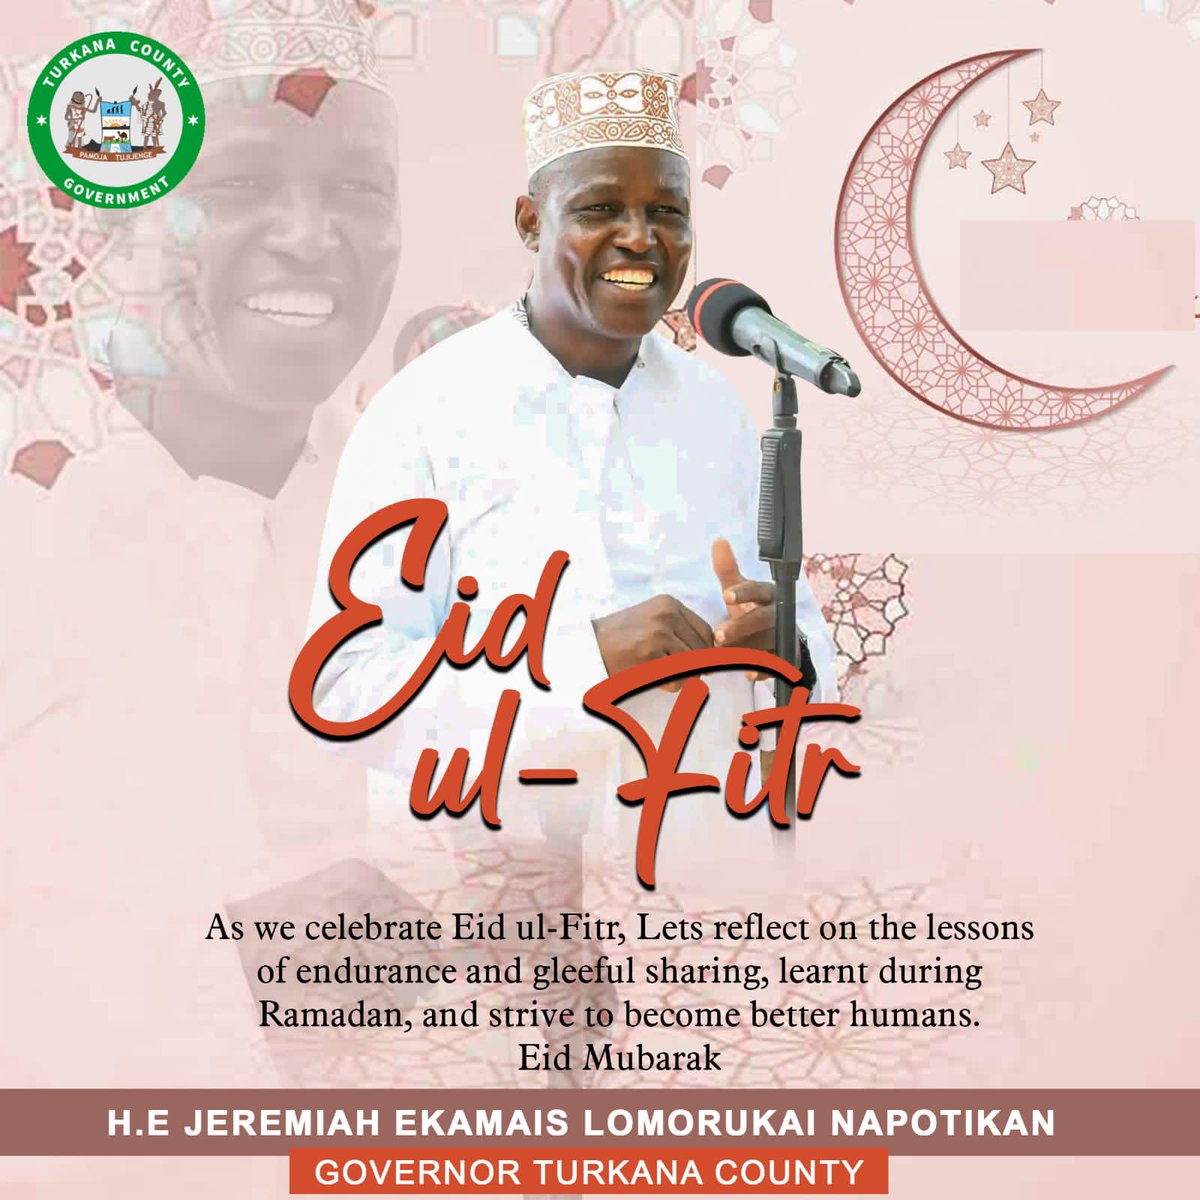 #EidMubarak to all our Muslim brothers and sisters.